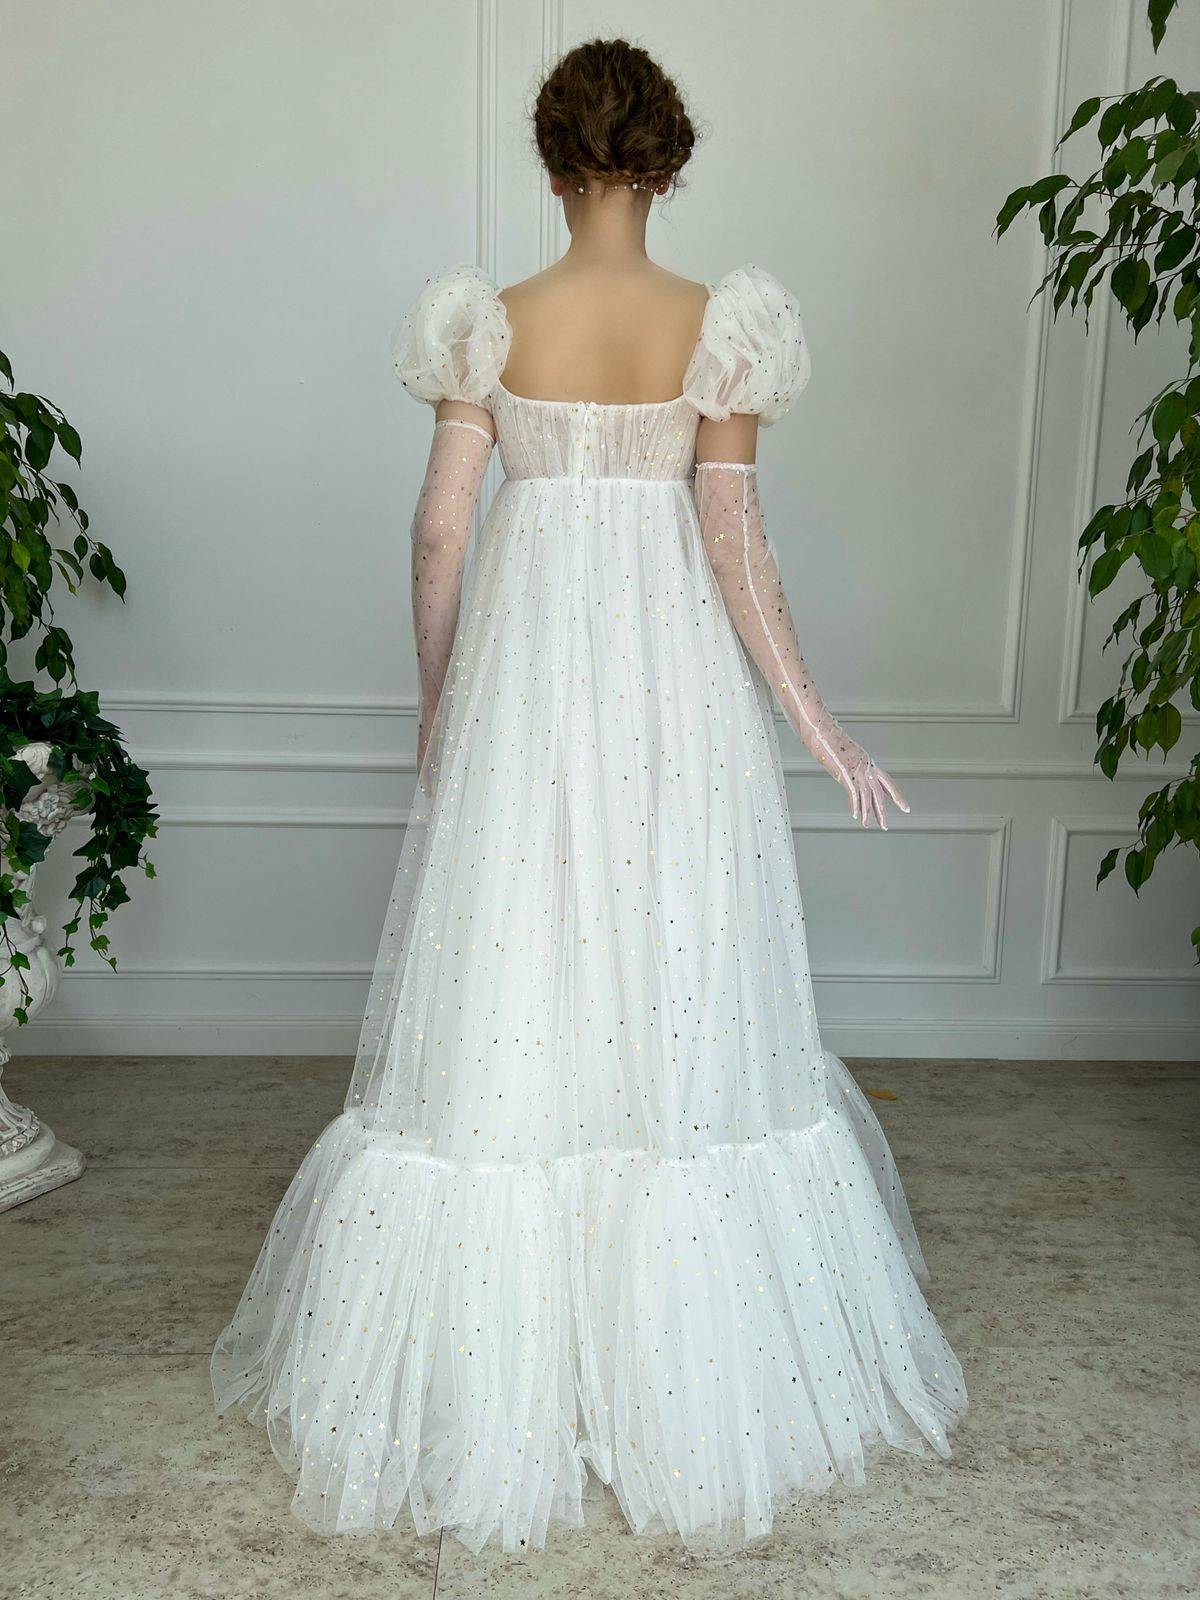 Sheath bridal dress with gold stars, cap sleeves and gloves